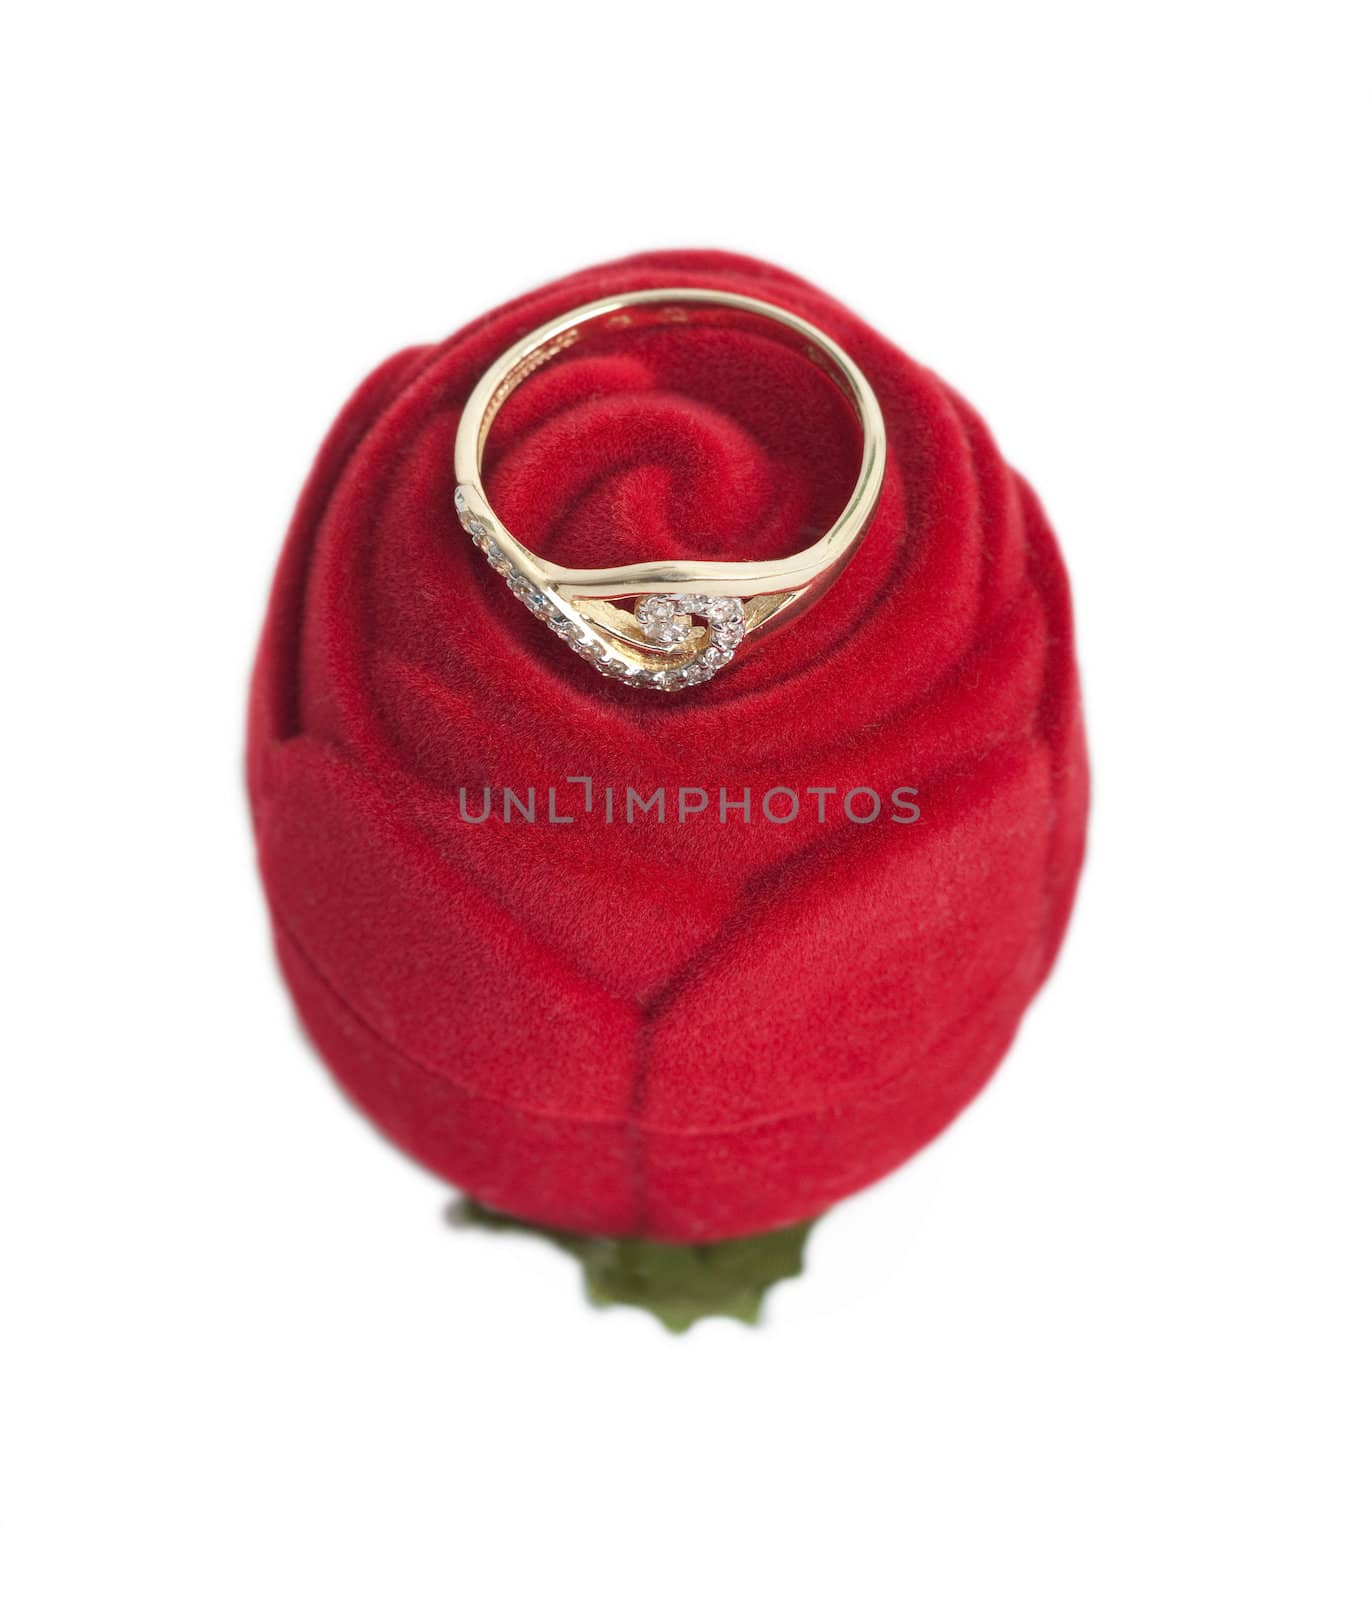 Wedding Ring In A Rose Ring Box Isolated On White